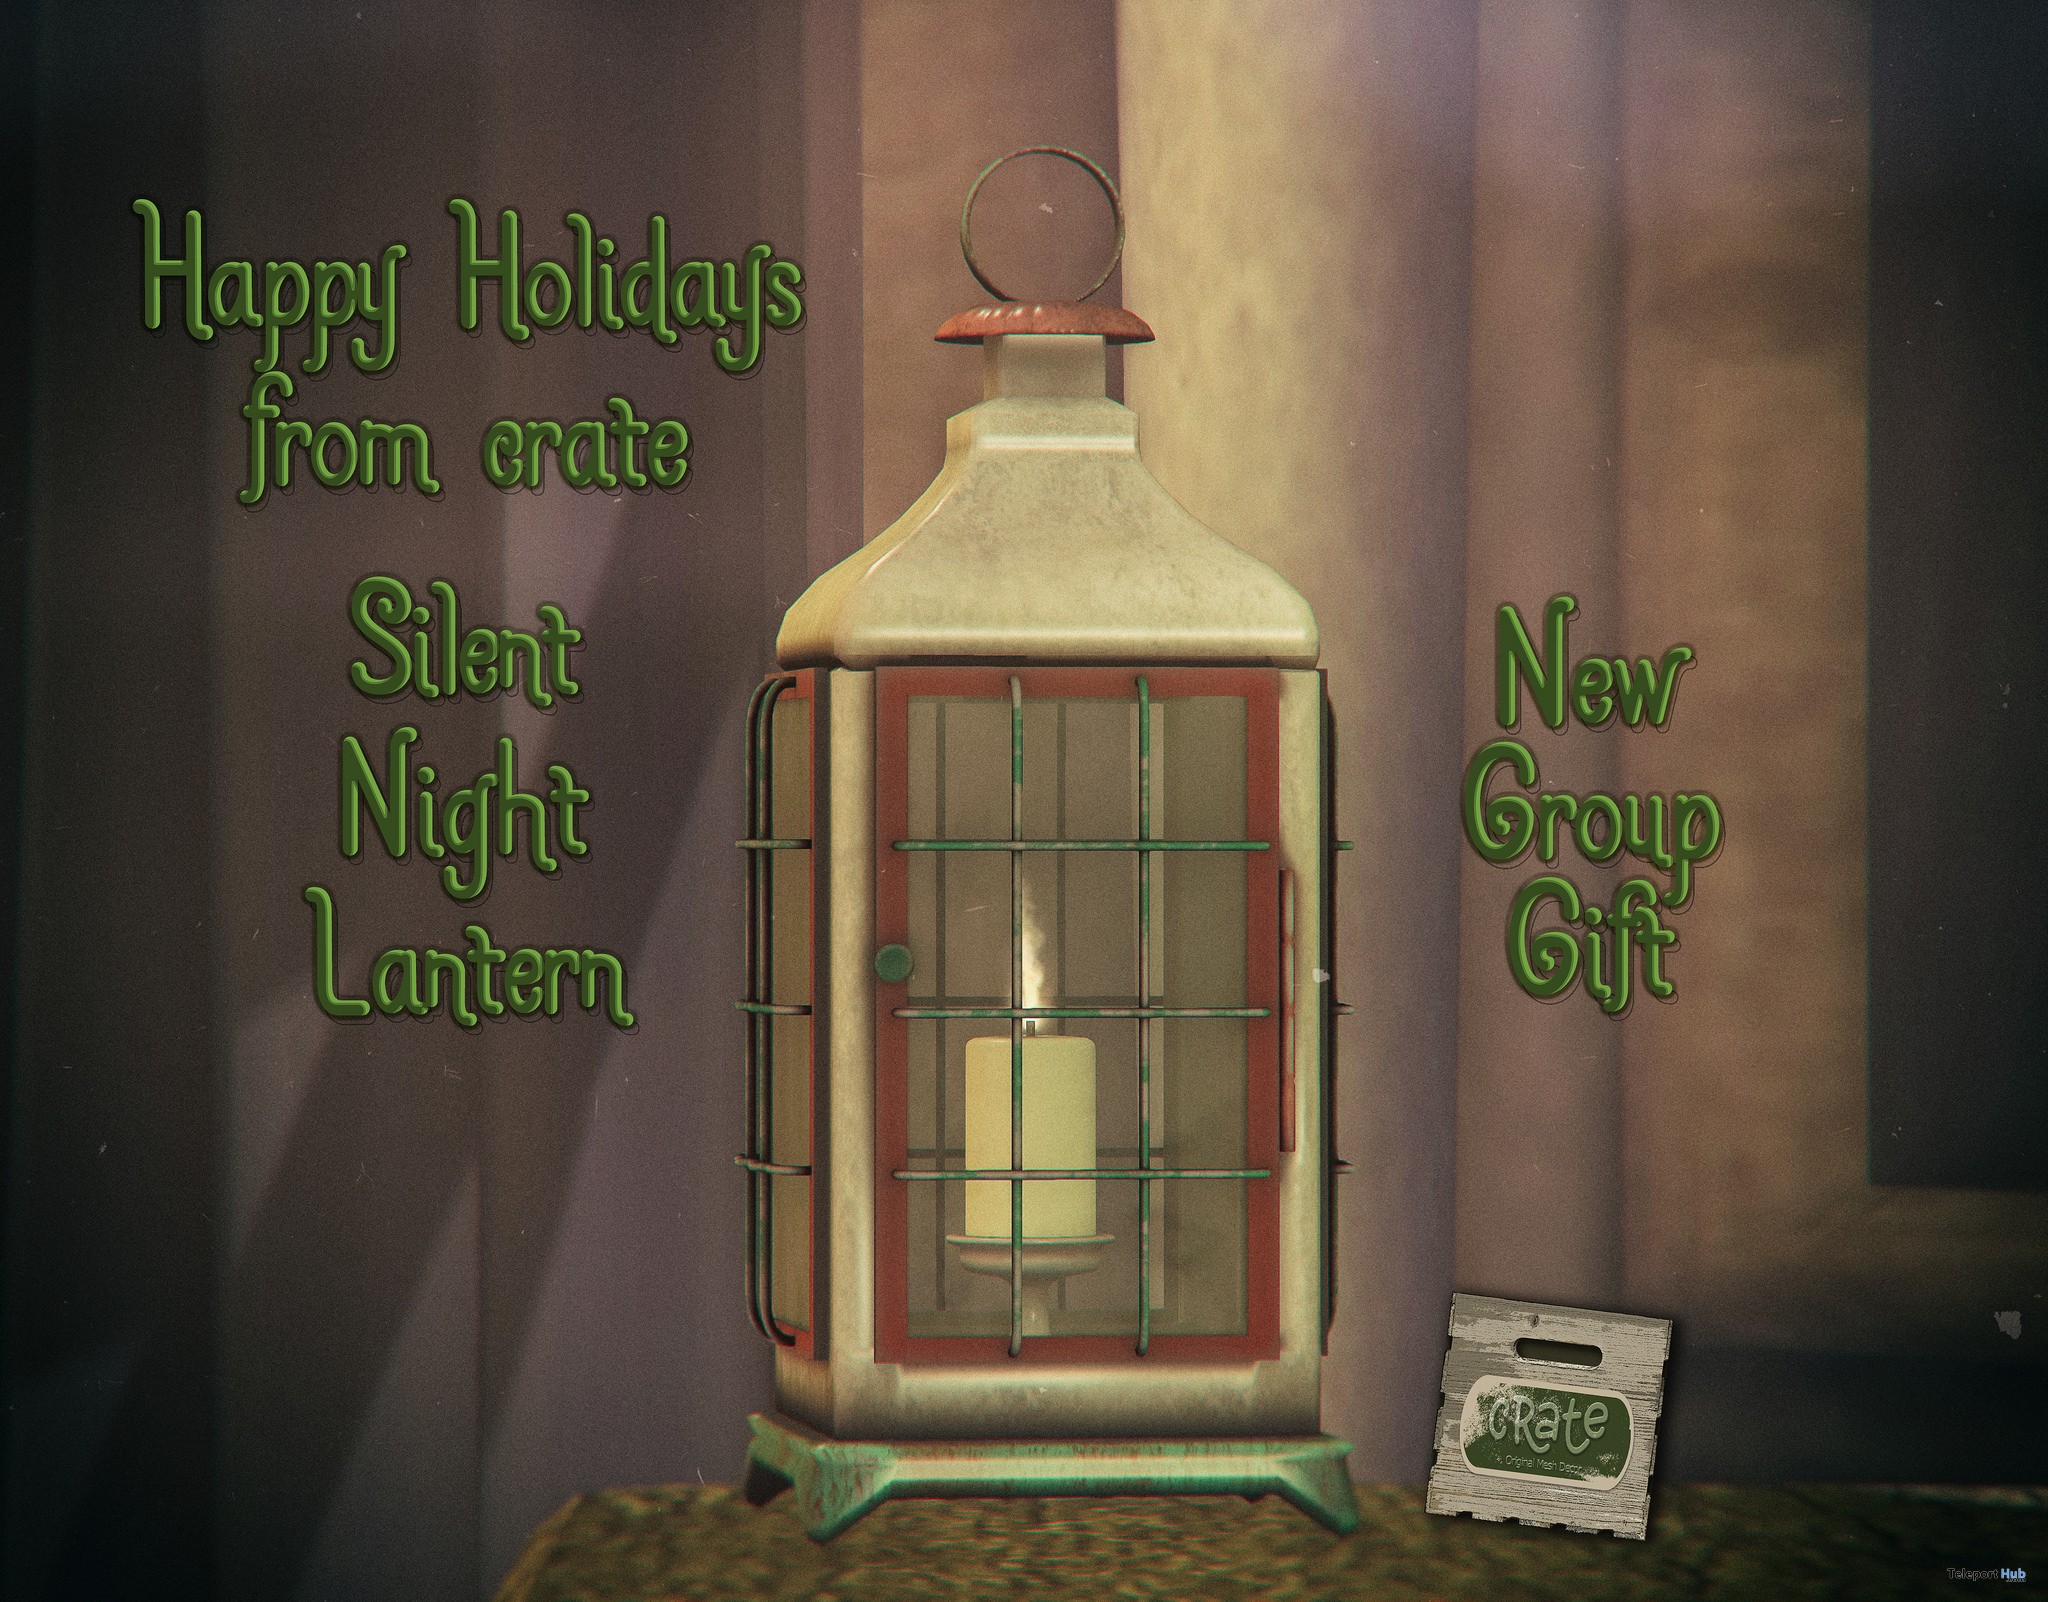 Silent Night Lantern December 2018 Group Gift by crate - Teleport Hub - teleporthub.com